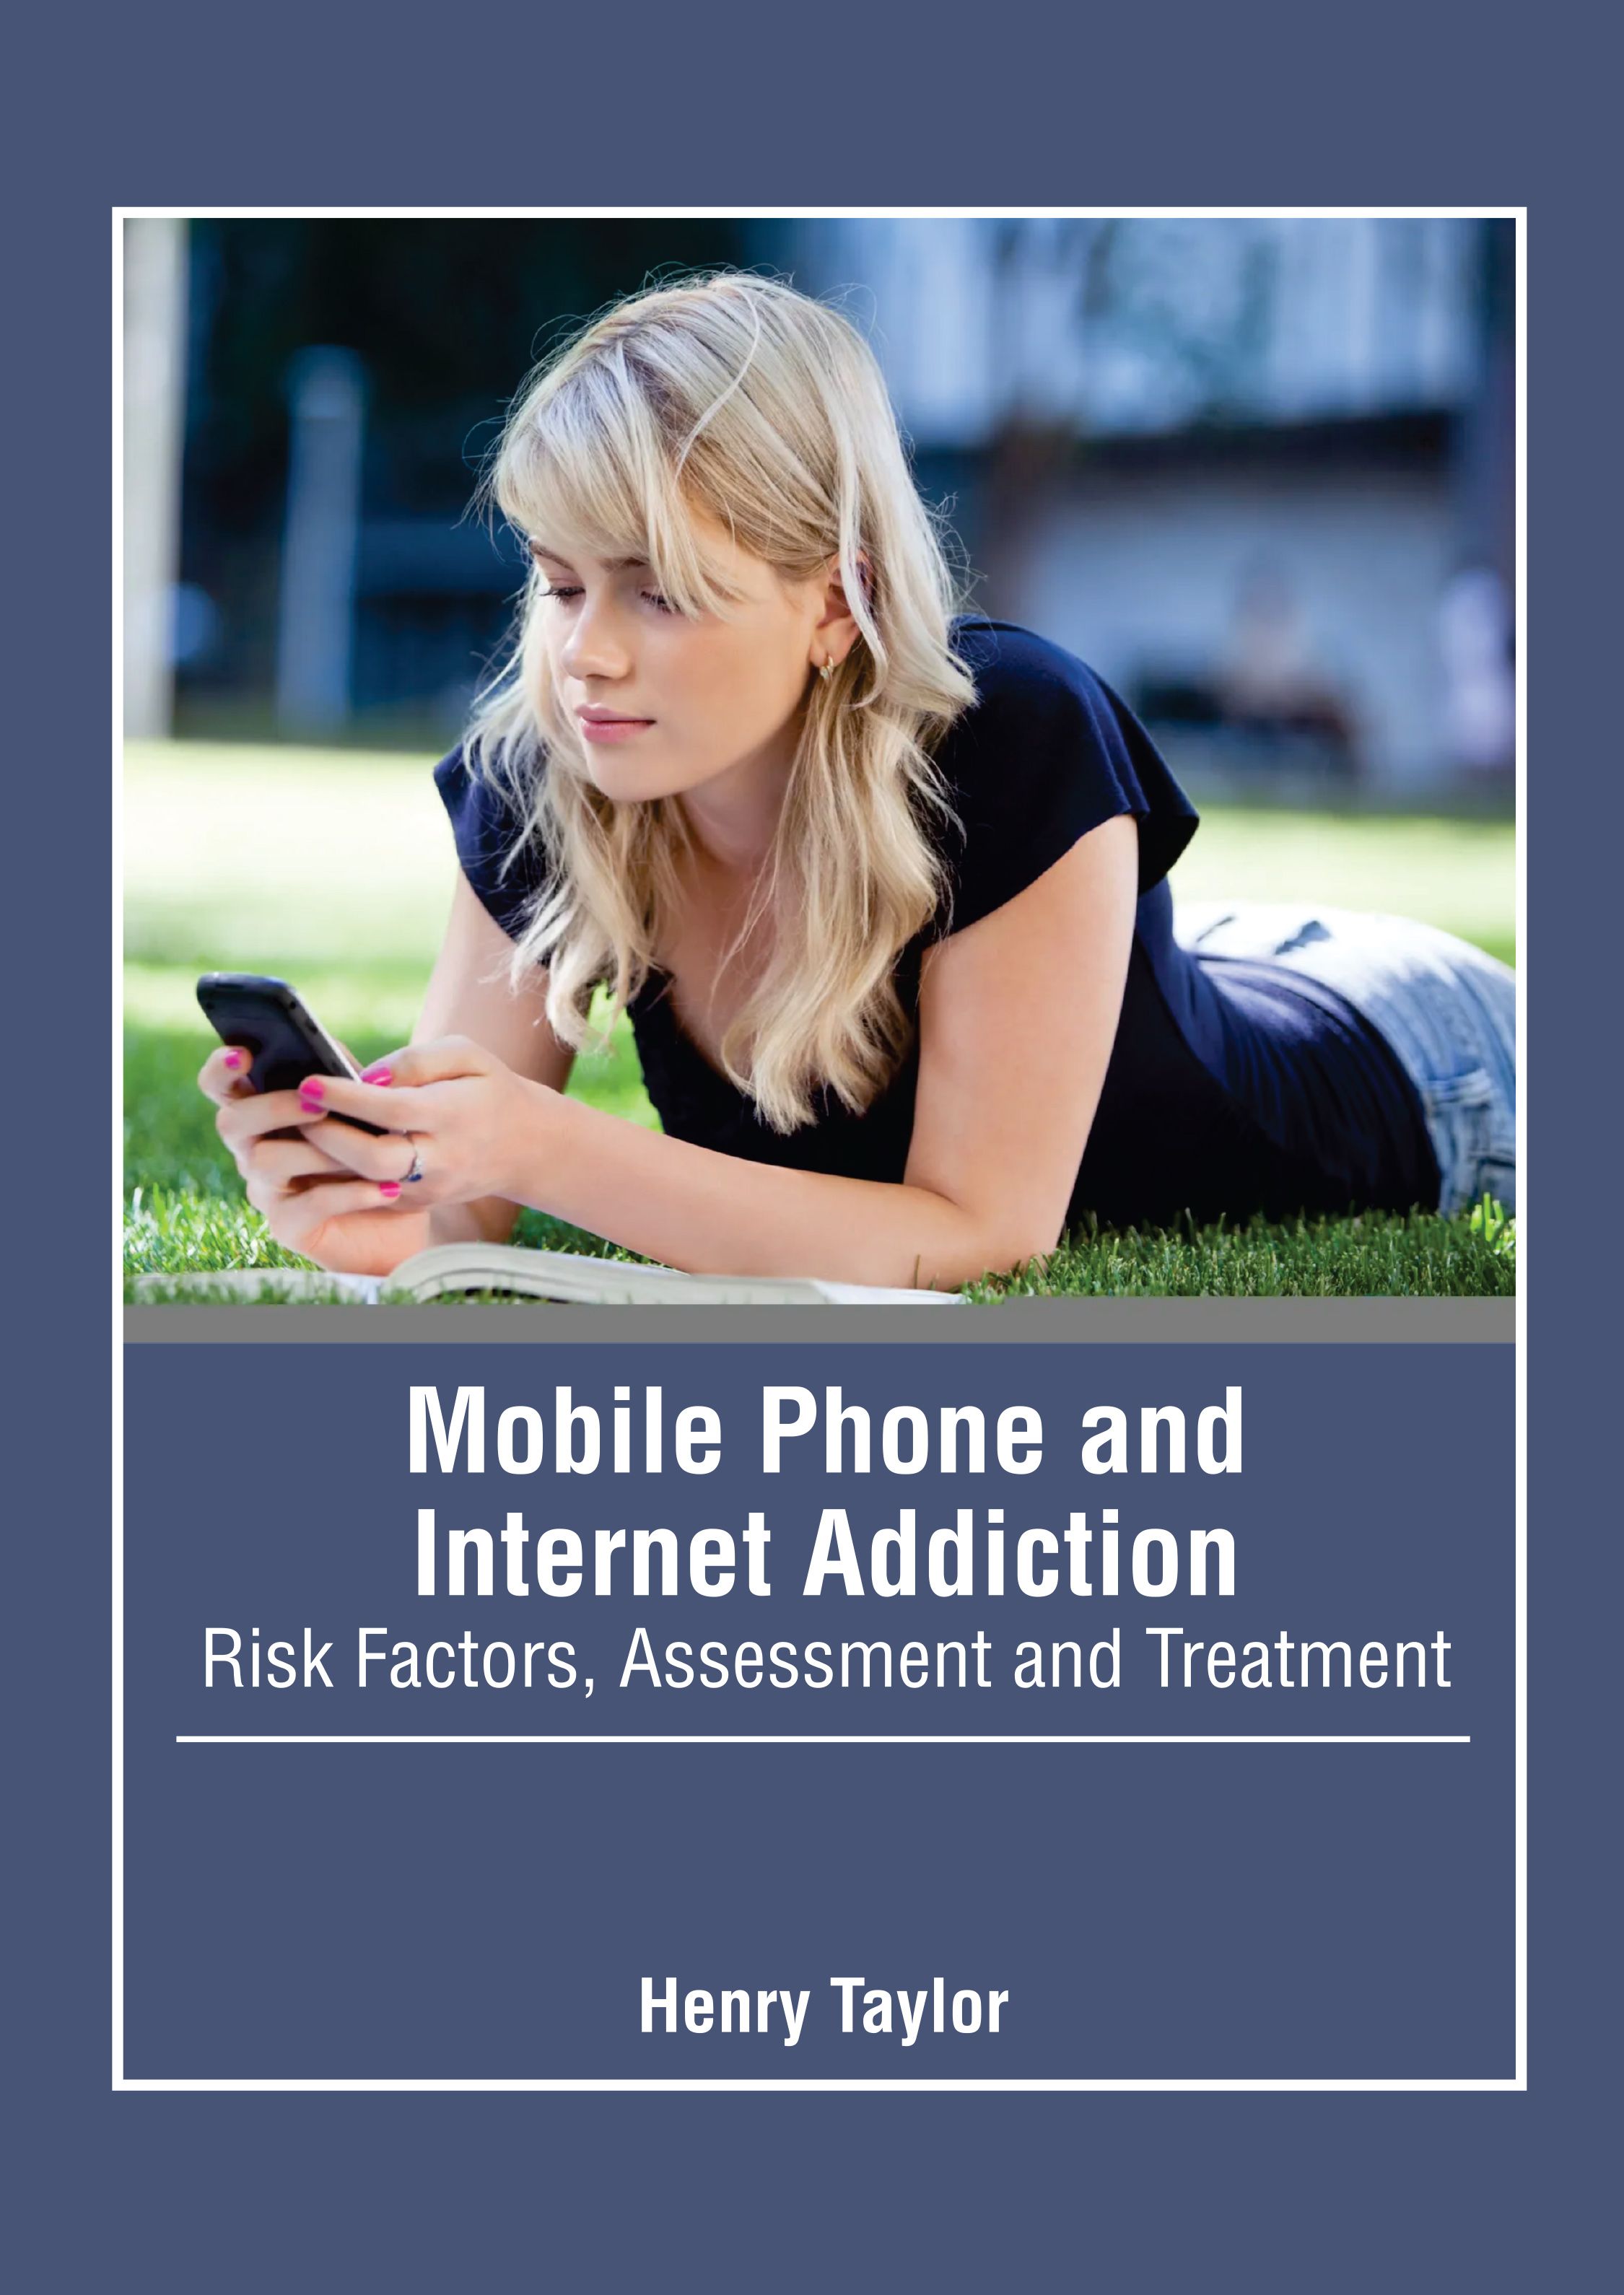 MOBILE PHONE AND INTERNET ADDICTION: RISK FACTORS, ASSESSMENT AND TREATMENT